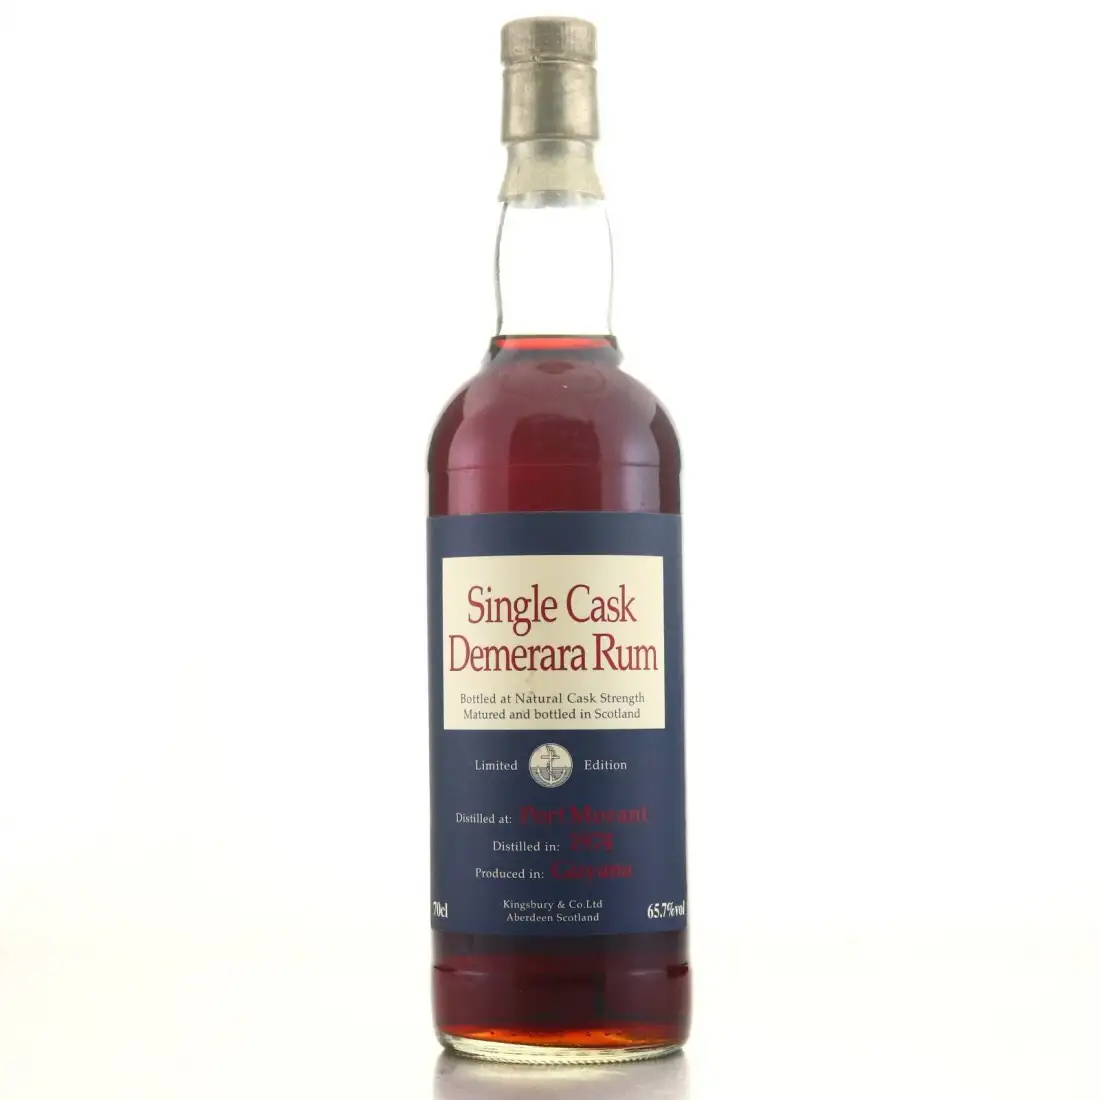 Image of the front of the bottle of the rum Demerara Rum Single Cask